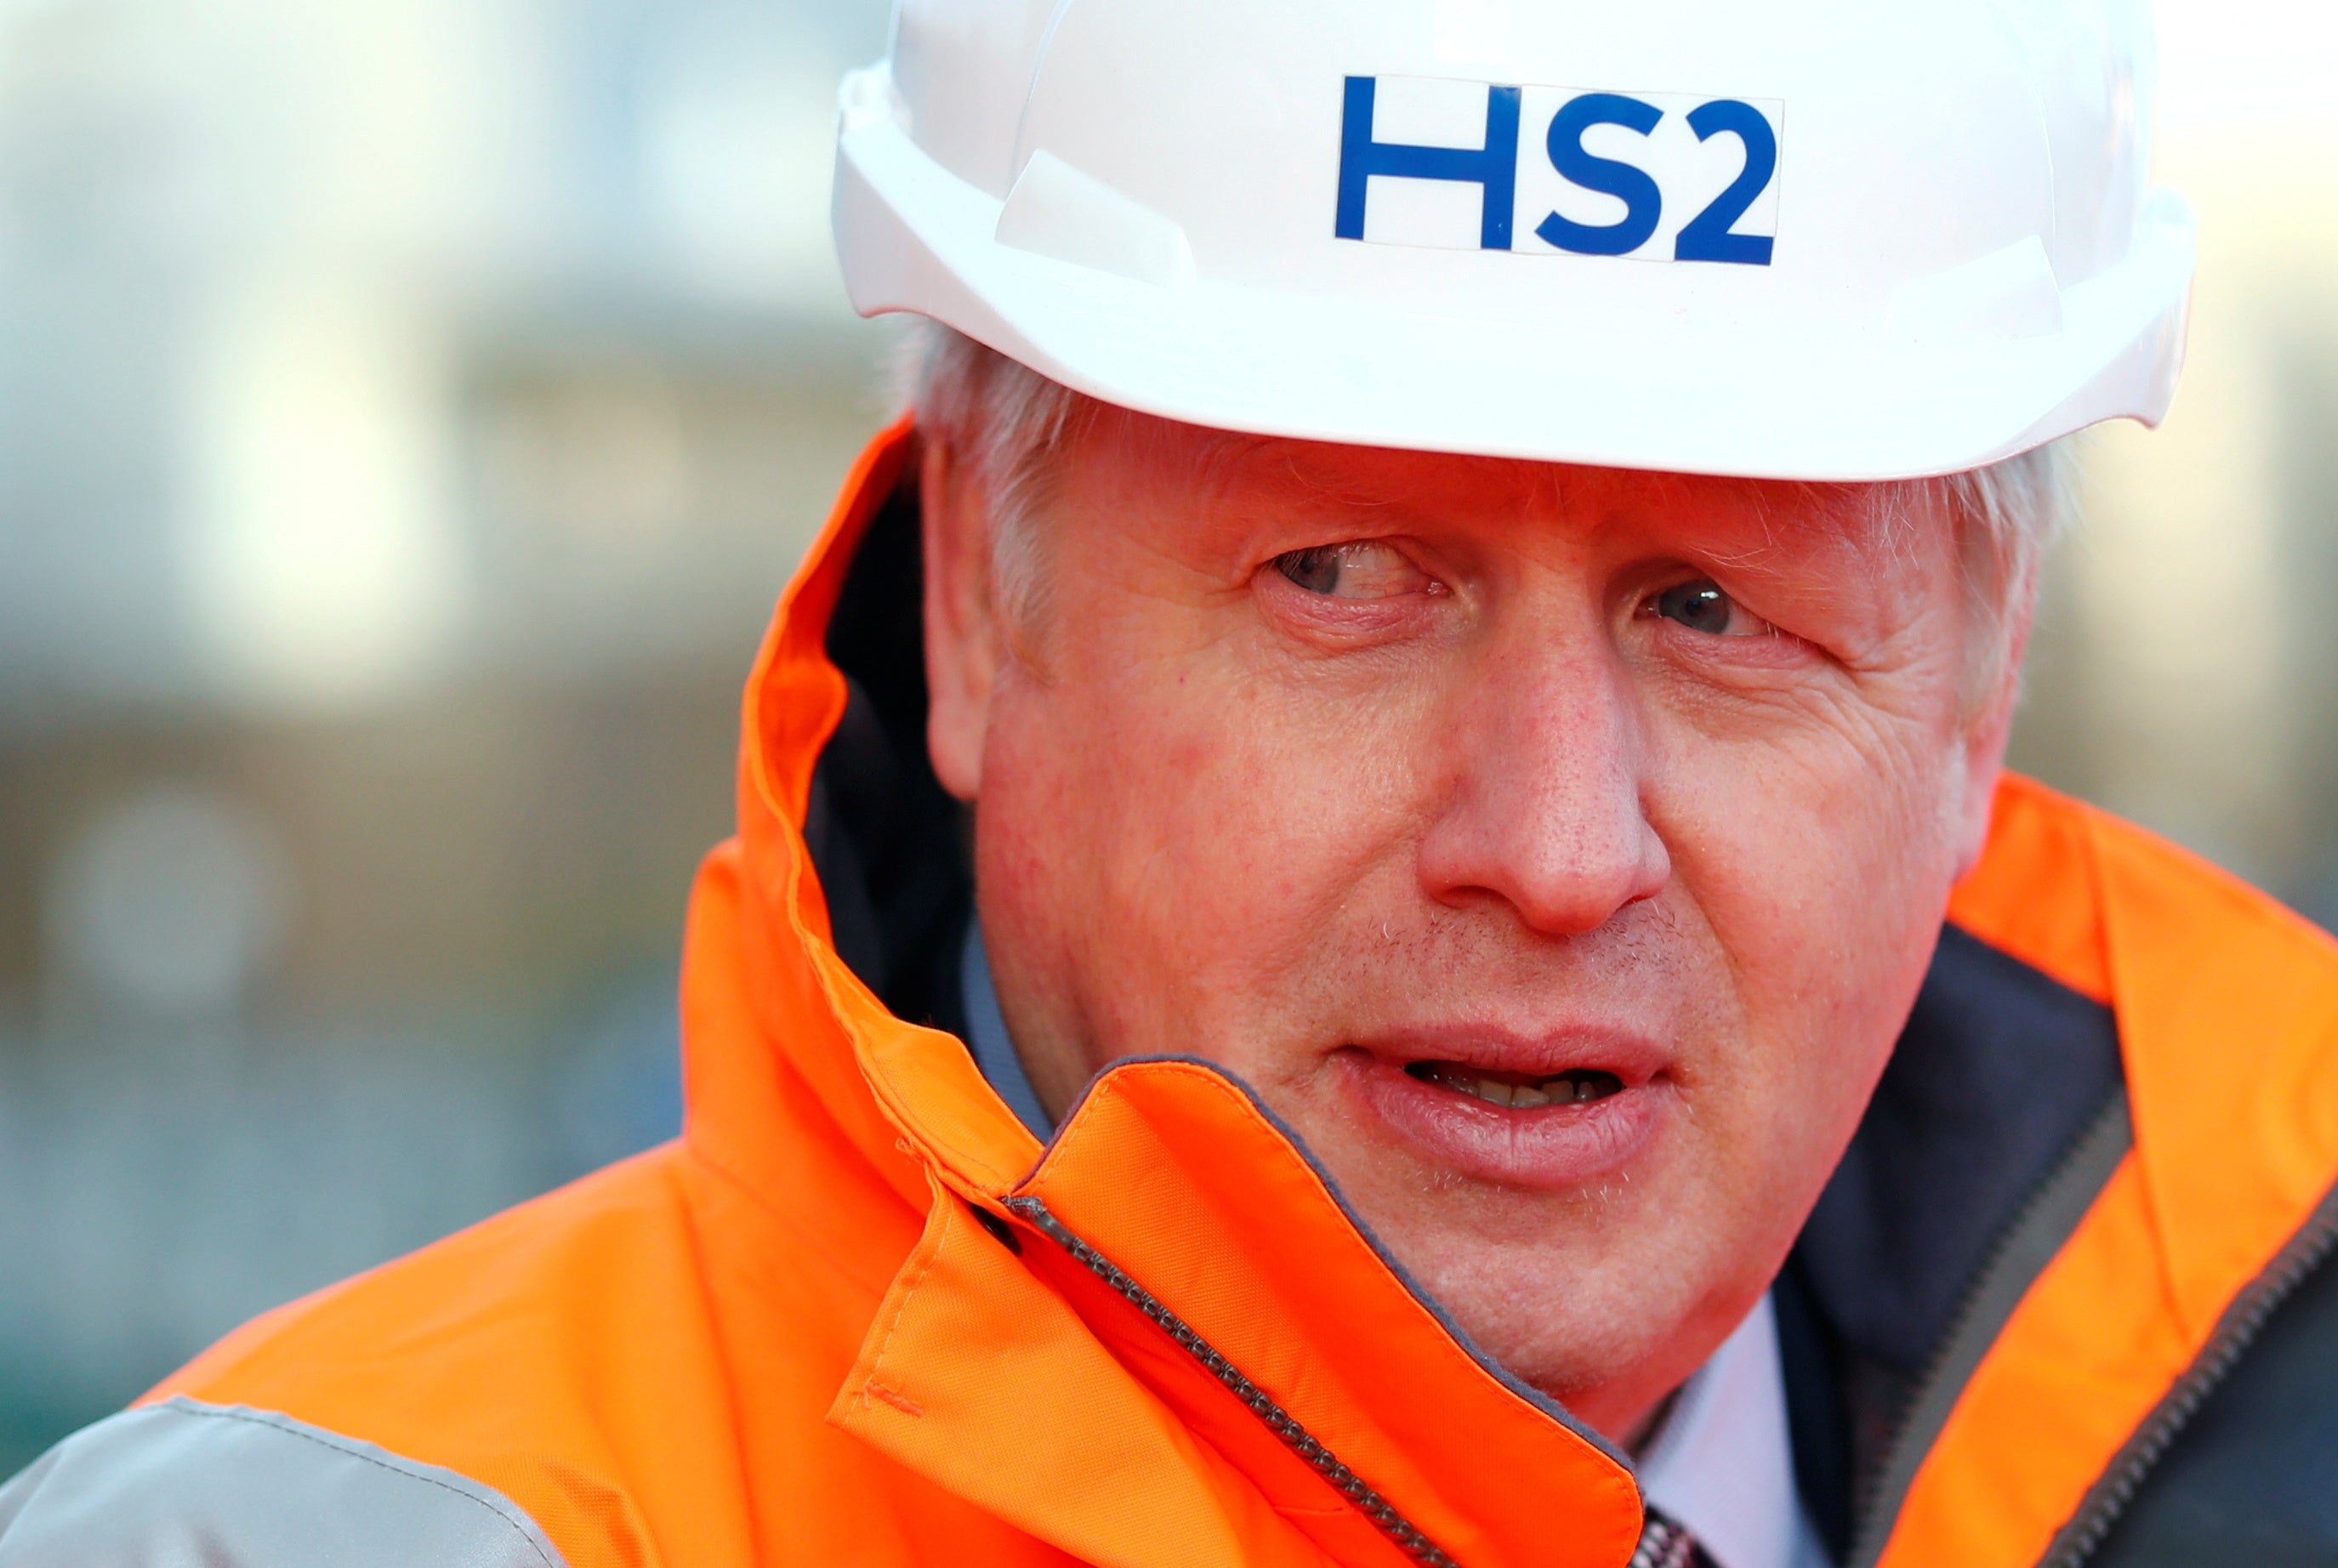 Boris Johnson looks on during a visit to an HS2 project site